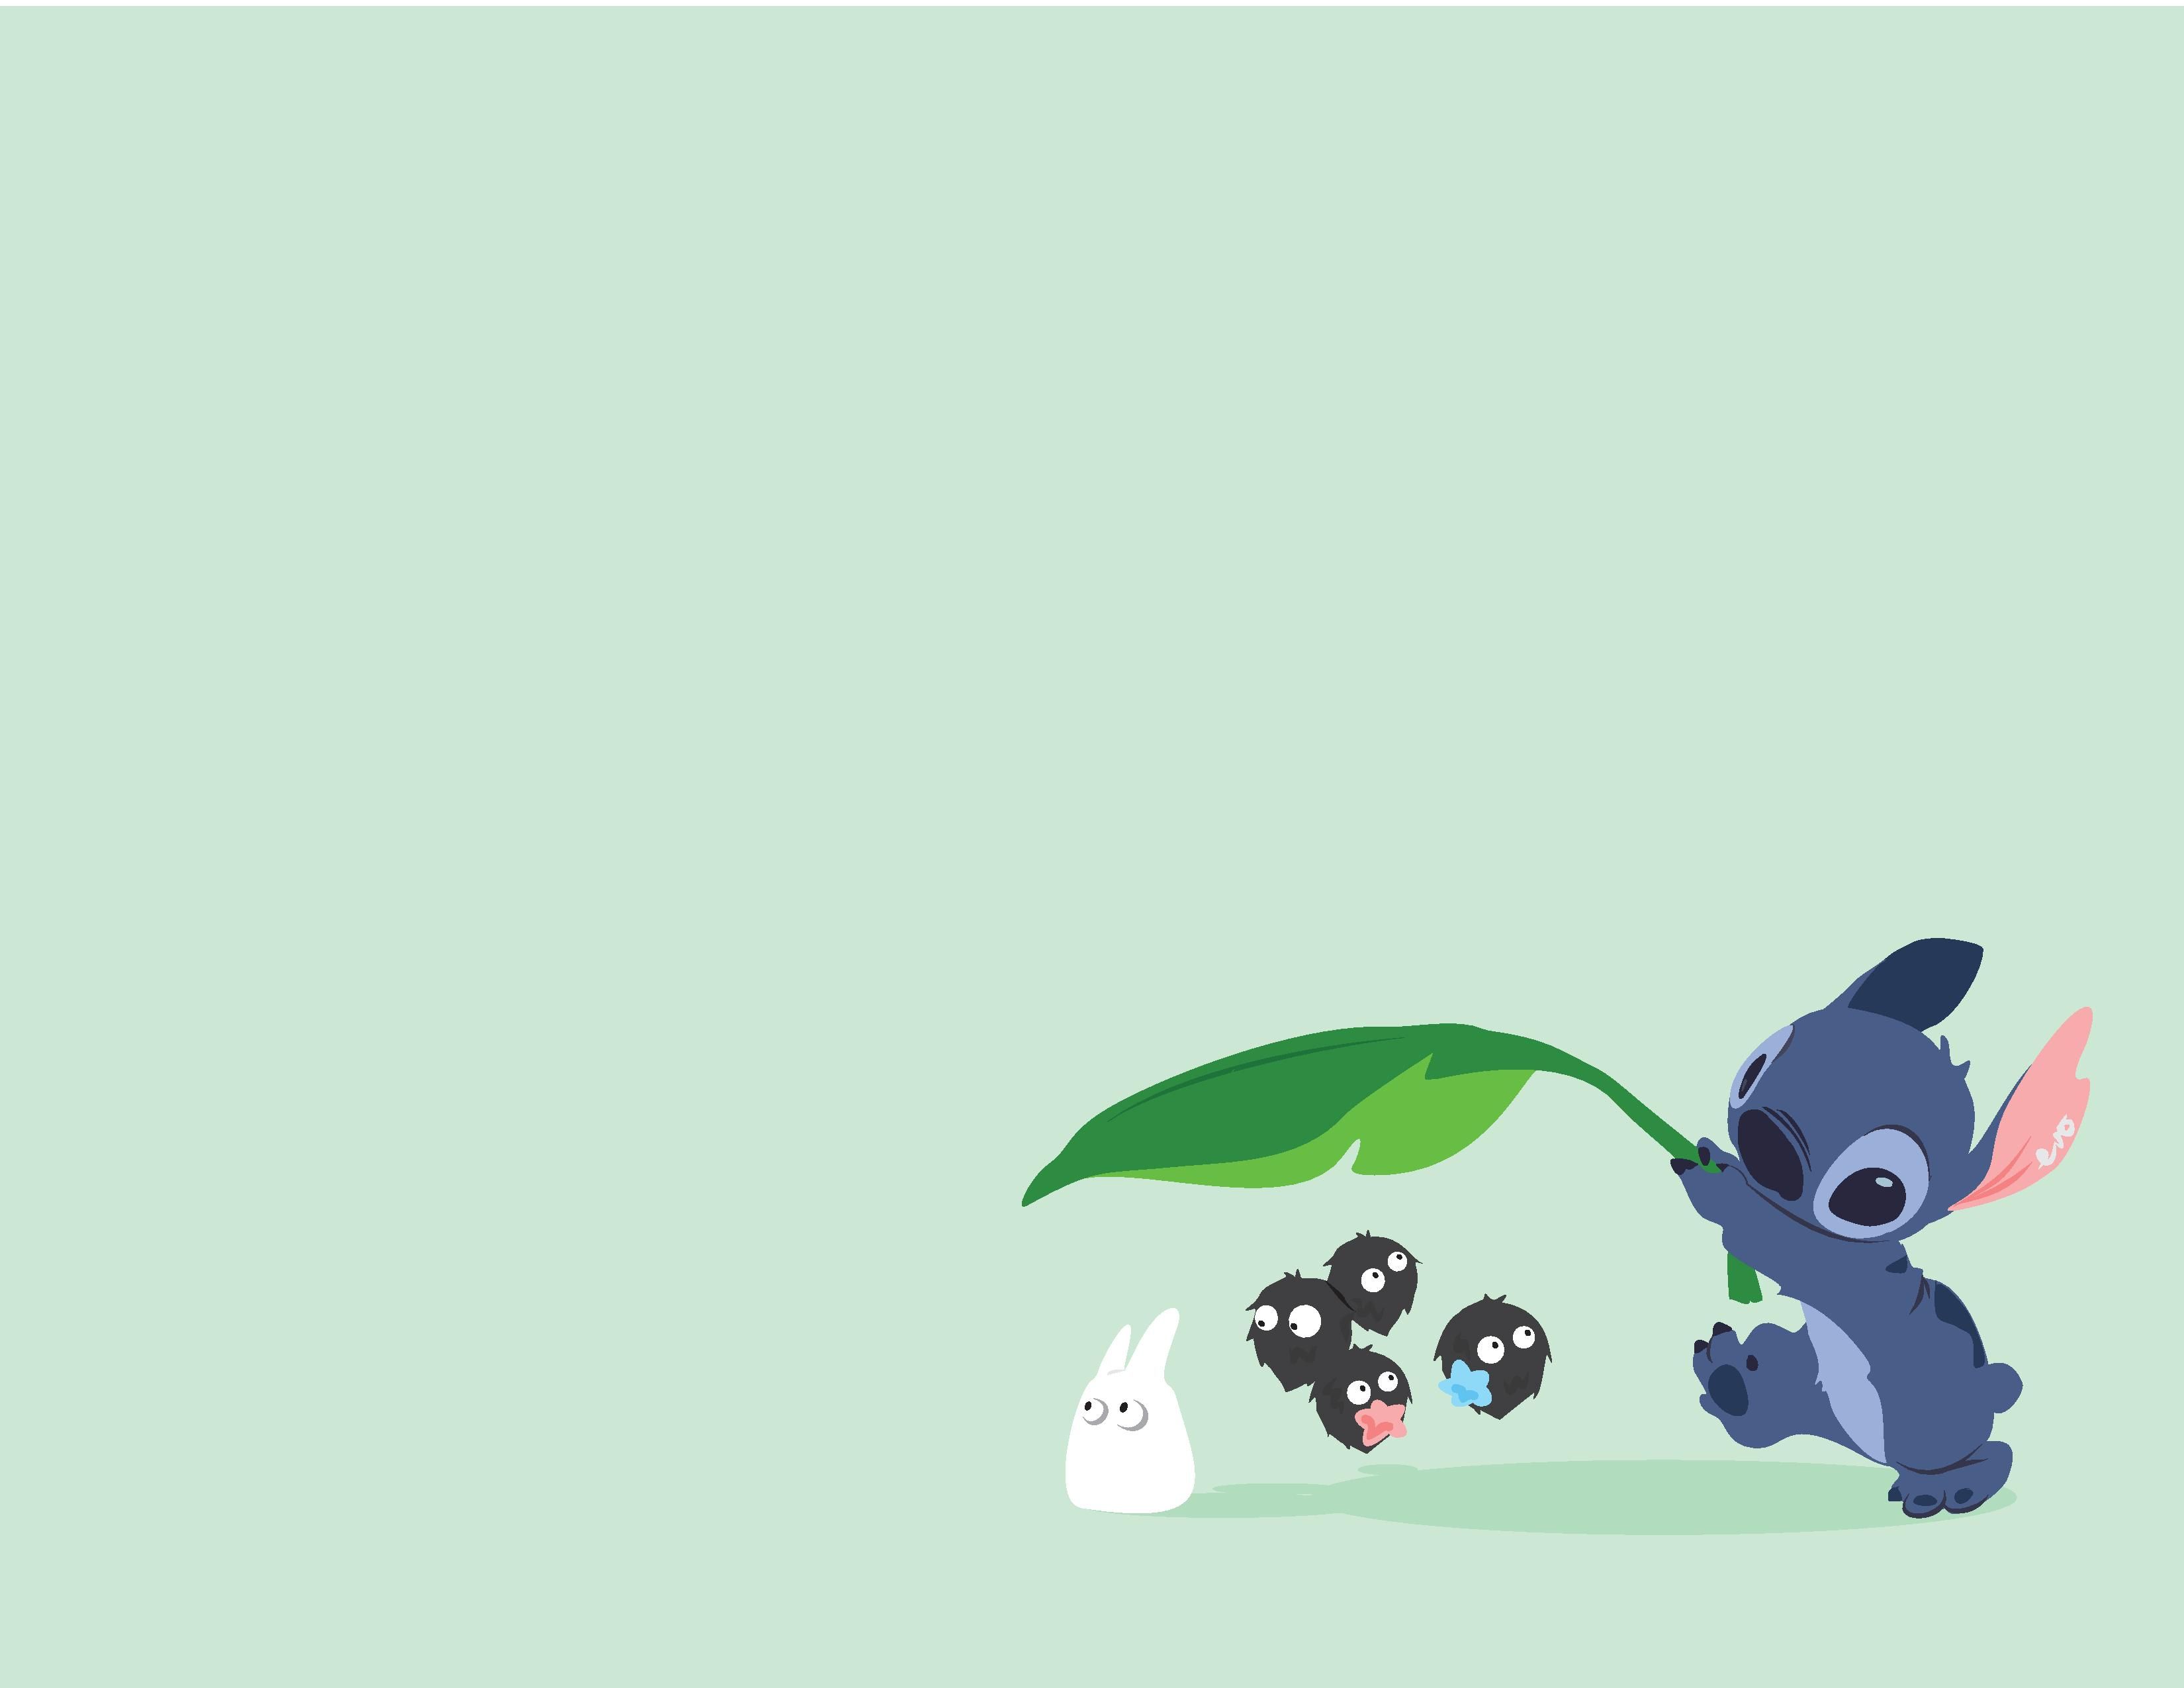 A stitch wallpaper with stitch playing with some bugs - Disney